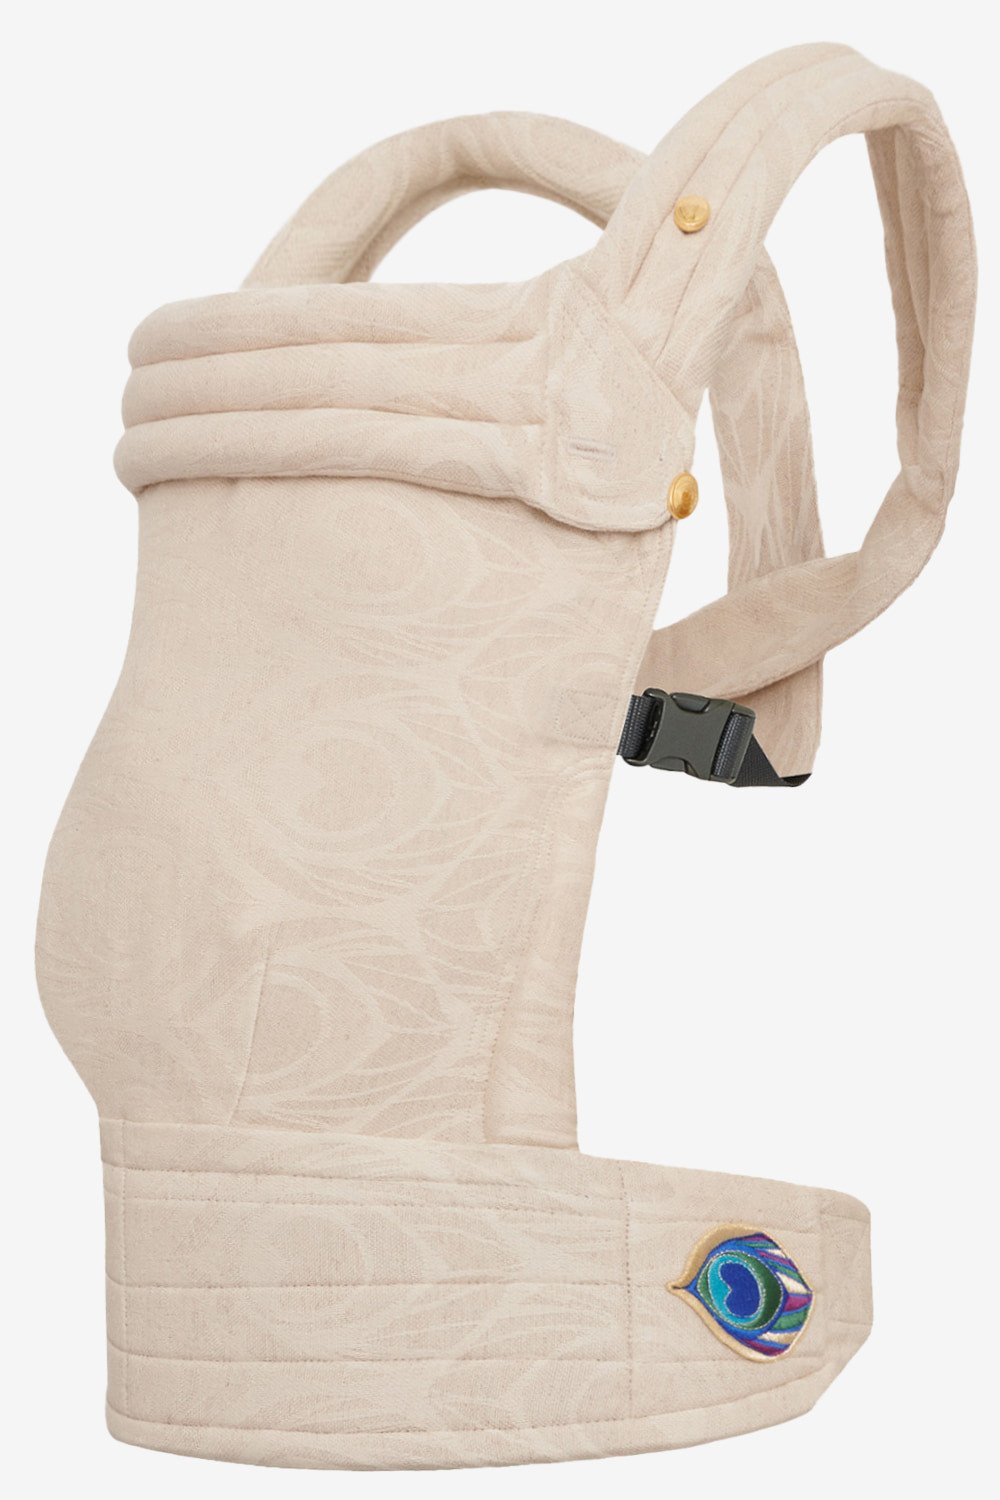 Beige baby carrier with peacock feather print in a linen blend